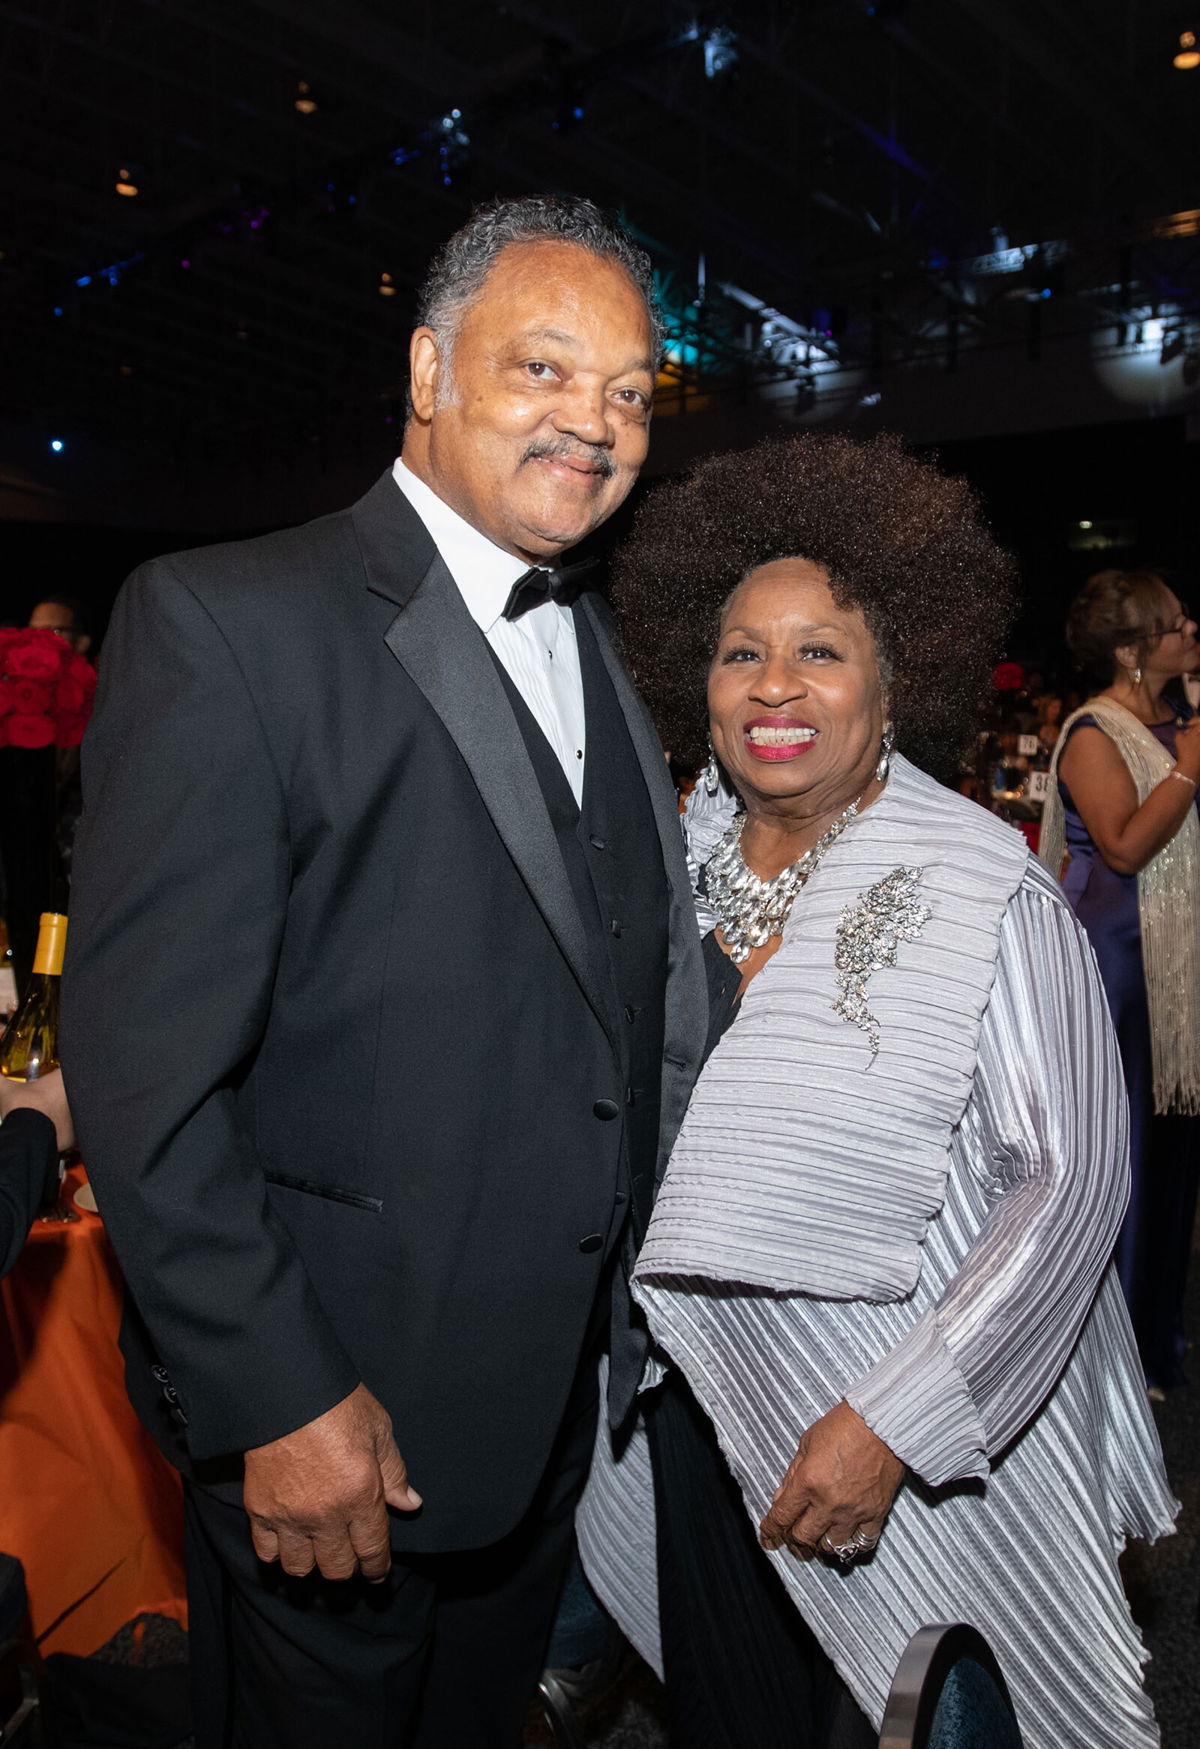 <i>Earl Gibson III/Getty Images</i><br/>Rev. Jesse Jackson and his wife